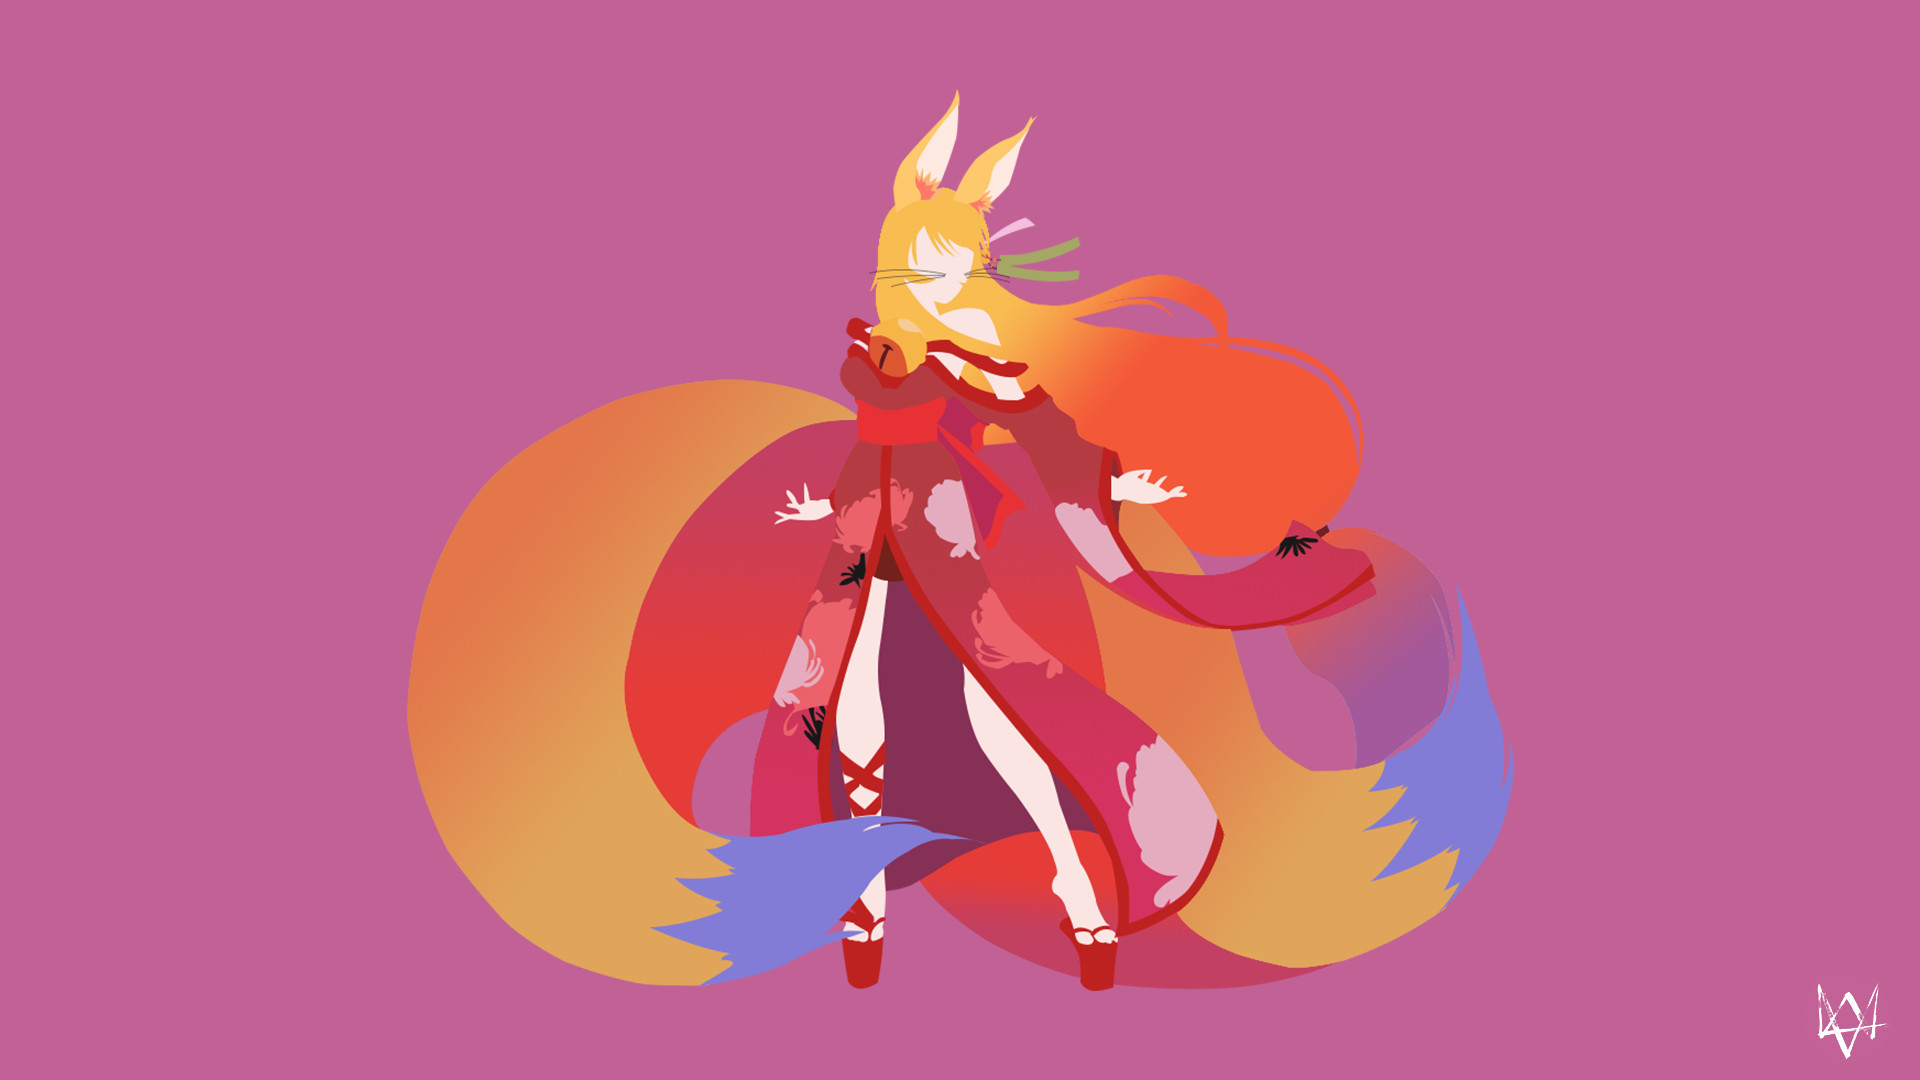 Miko No Game No Life Minimalist Anime Wallpaper by Lucifer012